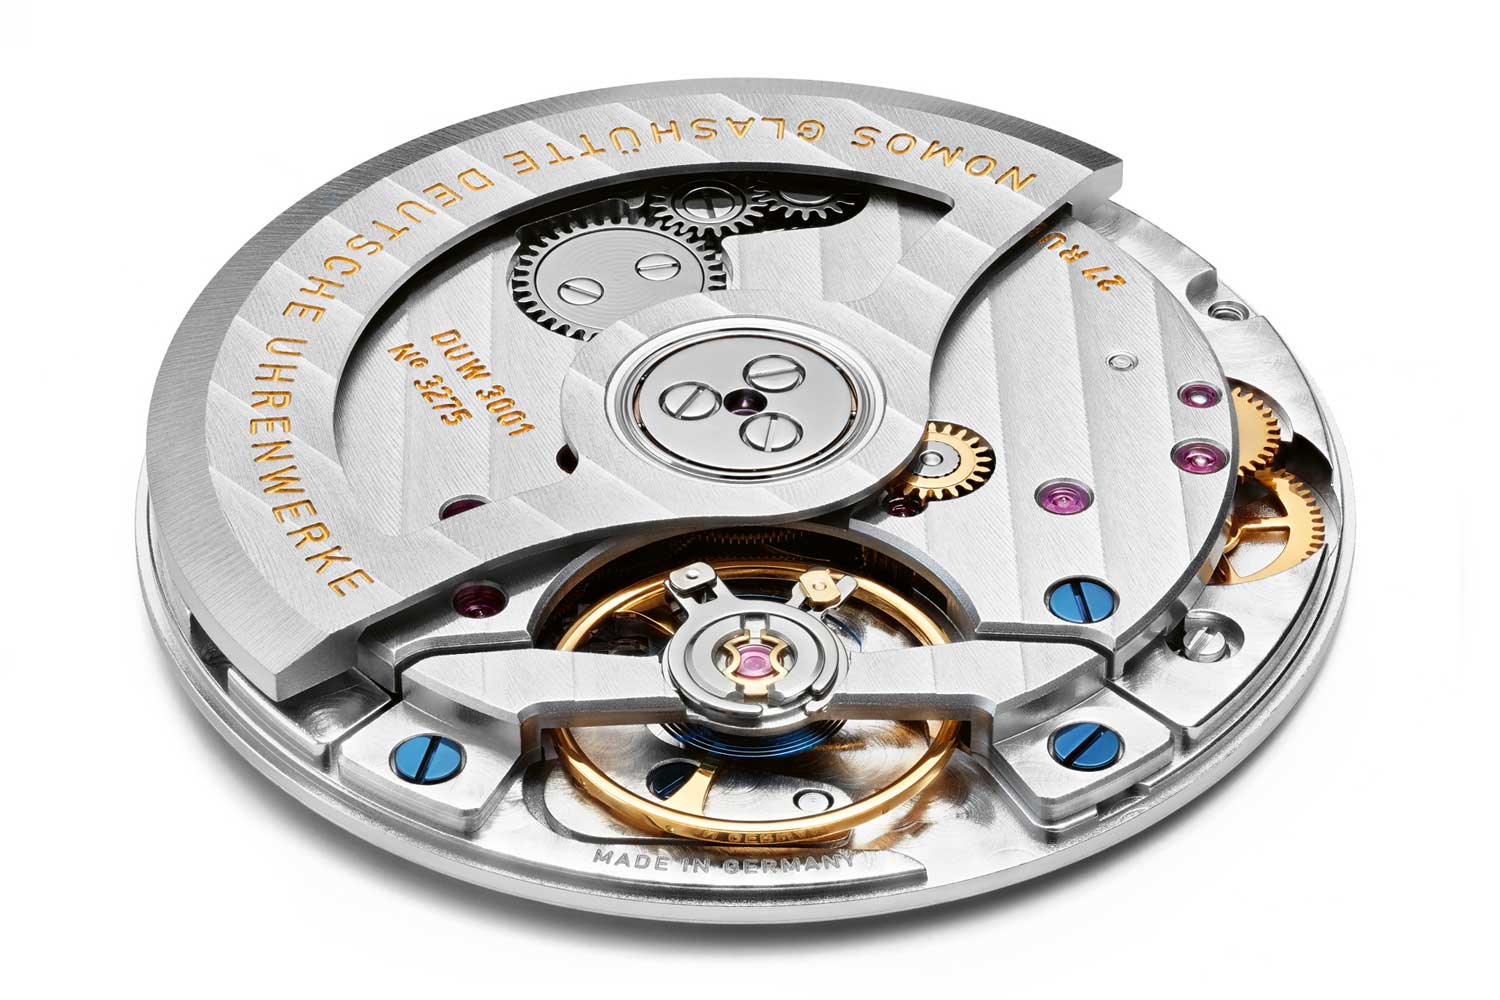 The slim DUW 3001 neomatic caliber built in-house by Nomos with height of 3.2mm